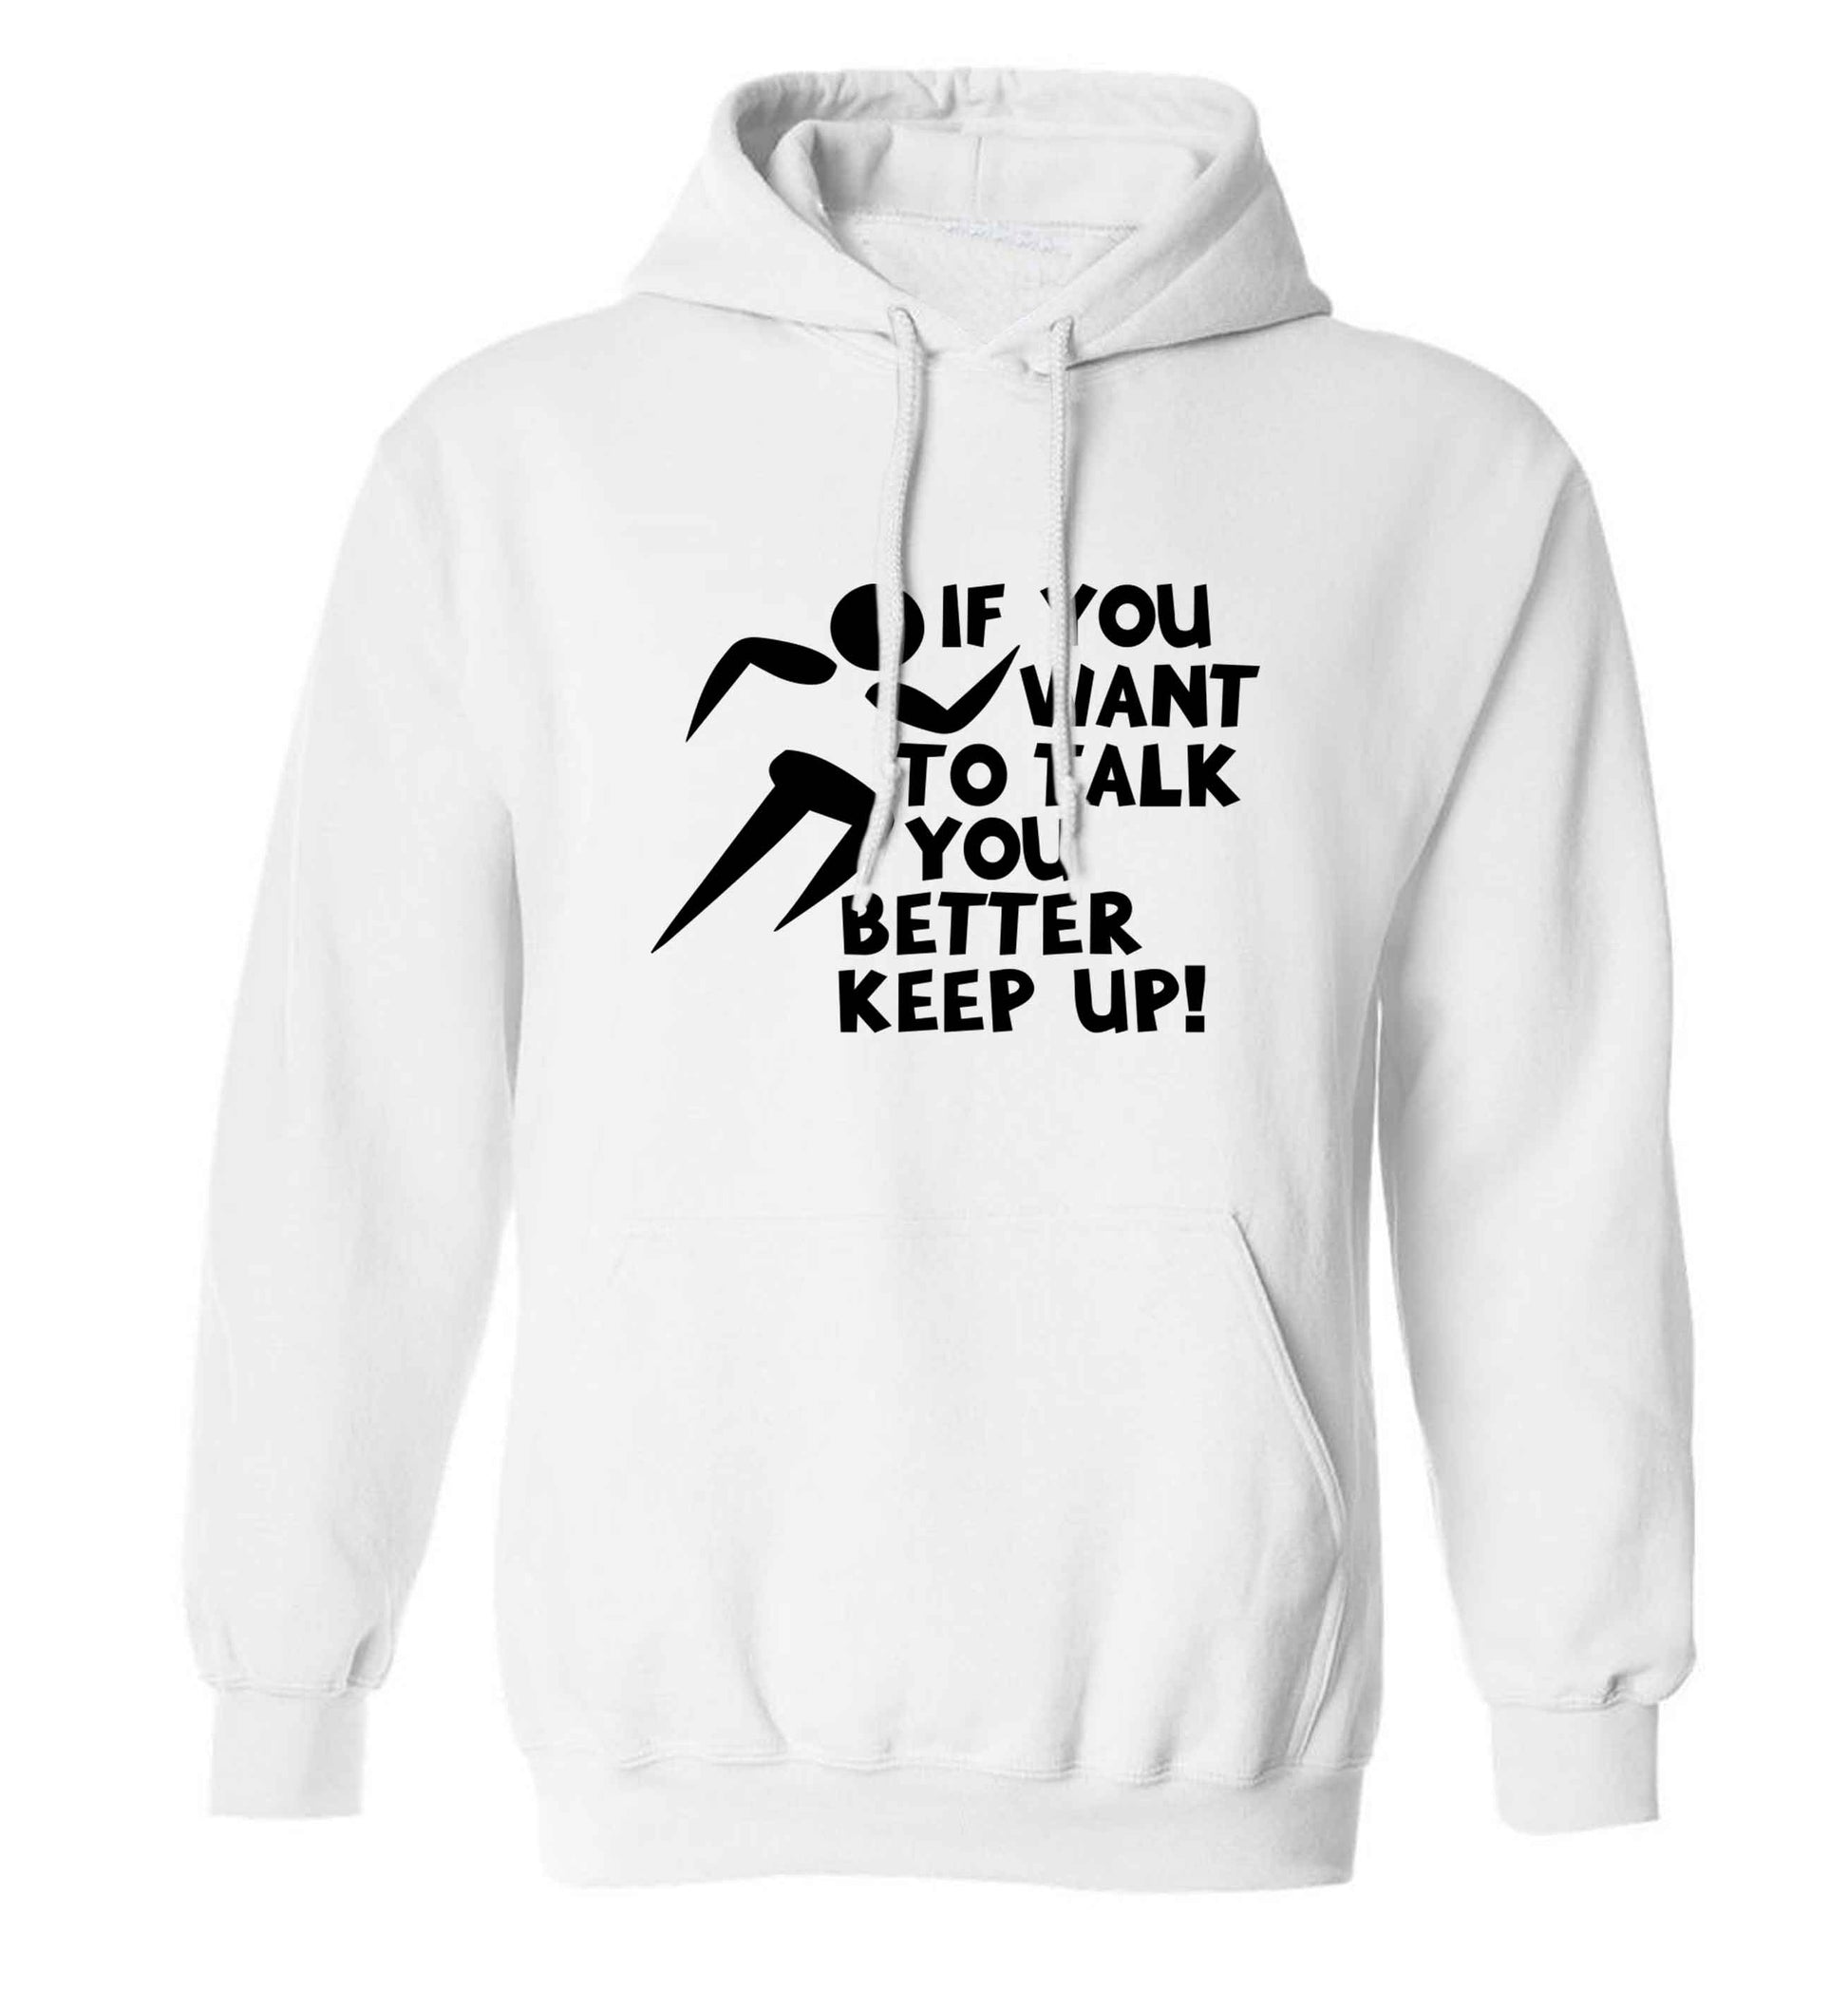 If you want to talk you better keep up! adults unisex white hoodie 2XL